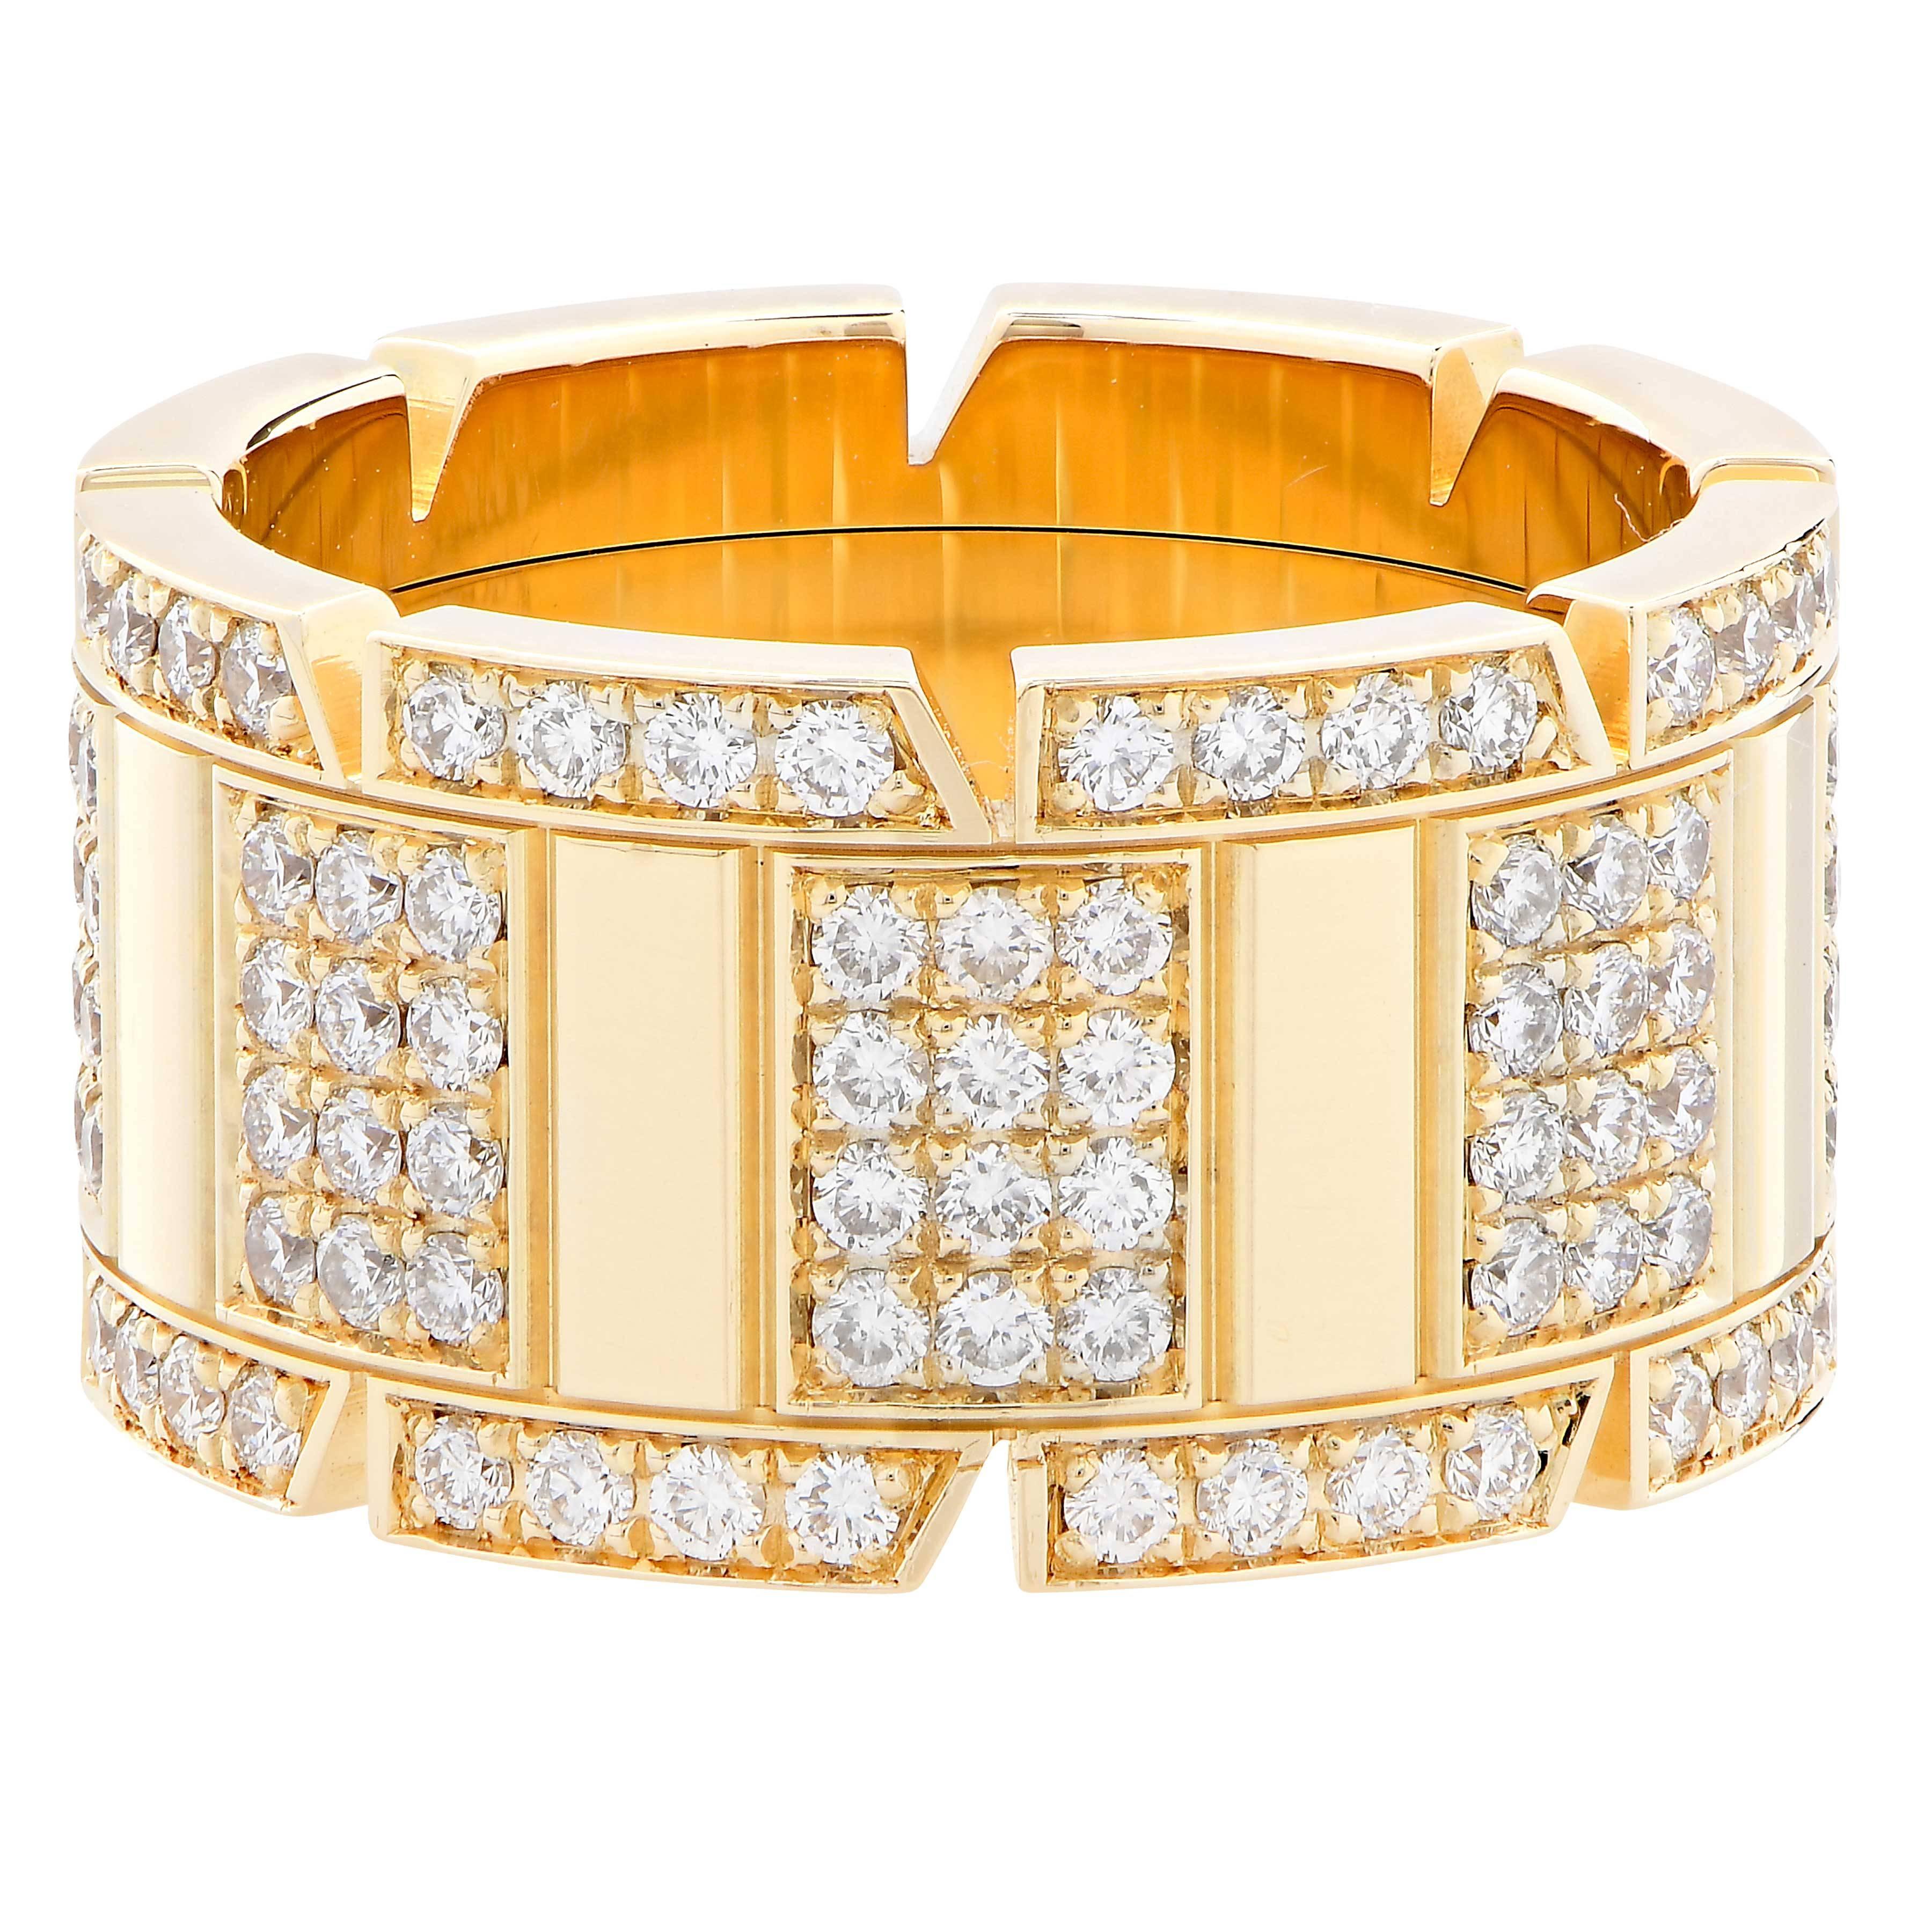 Cartier Large Tank Francaise Diamond Band featuring 160 round brilliant cut diamonds with an approximate weight of 2.5 carats set in 18 karat yellow gold. 
All diamonds are F color VS1 or better.
Ring size 54 / 7 1/4
Metal Type: 18 Karat Yellow Gold
